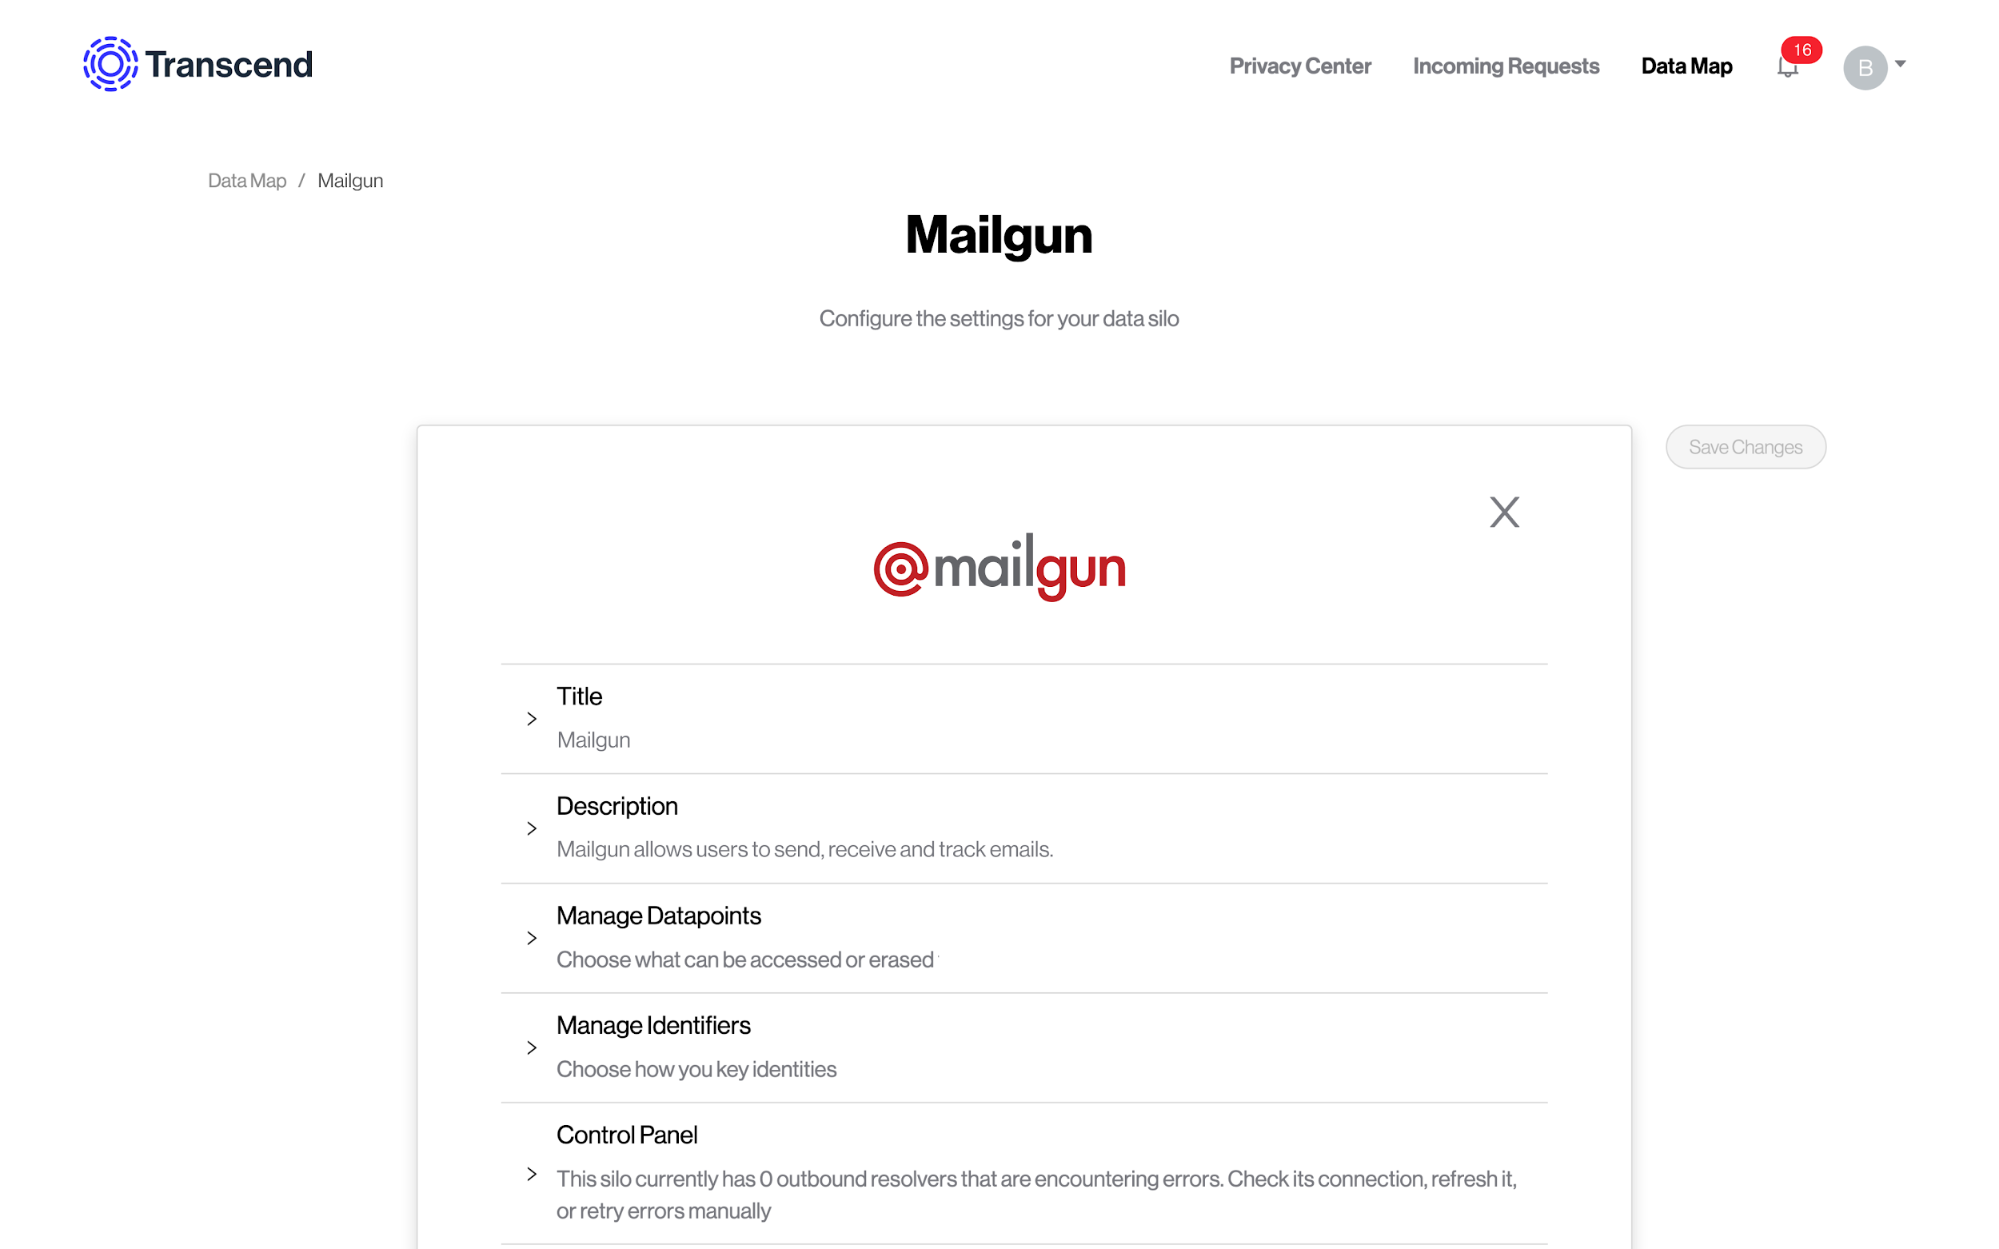 Setting up Mailgun to Transcend and data configuration page.